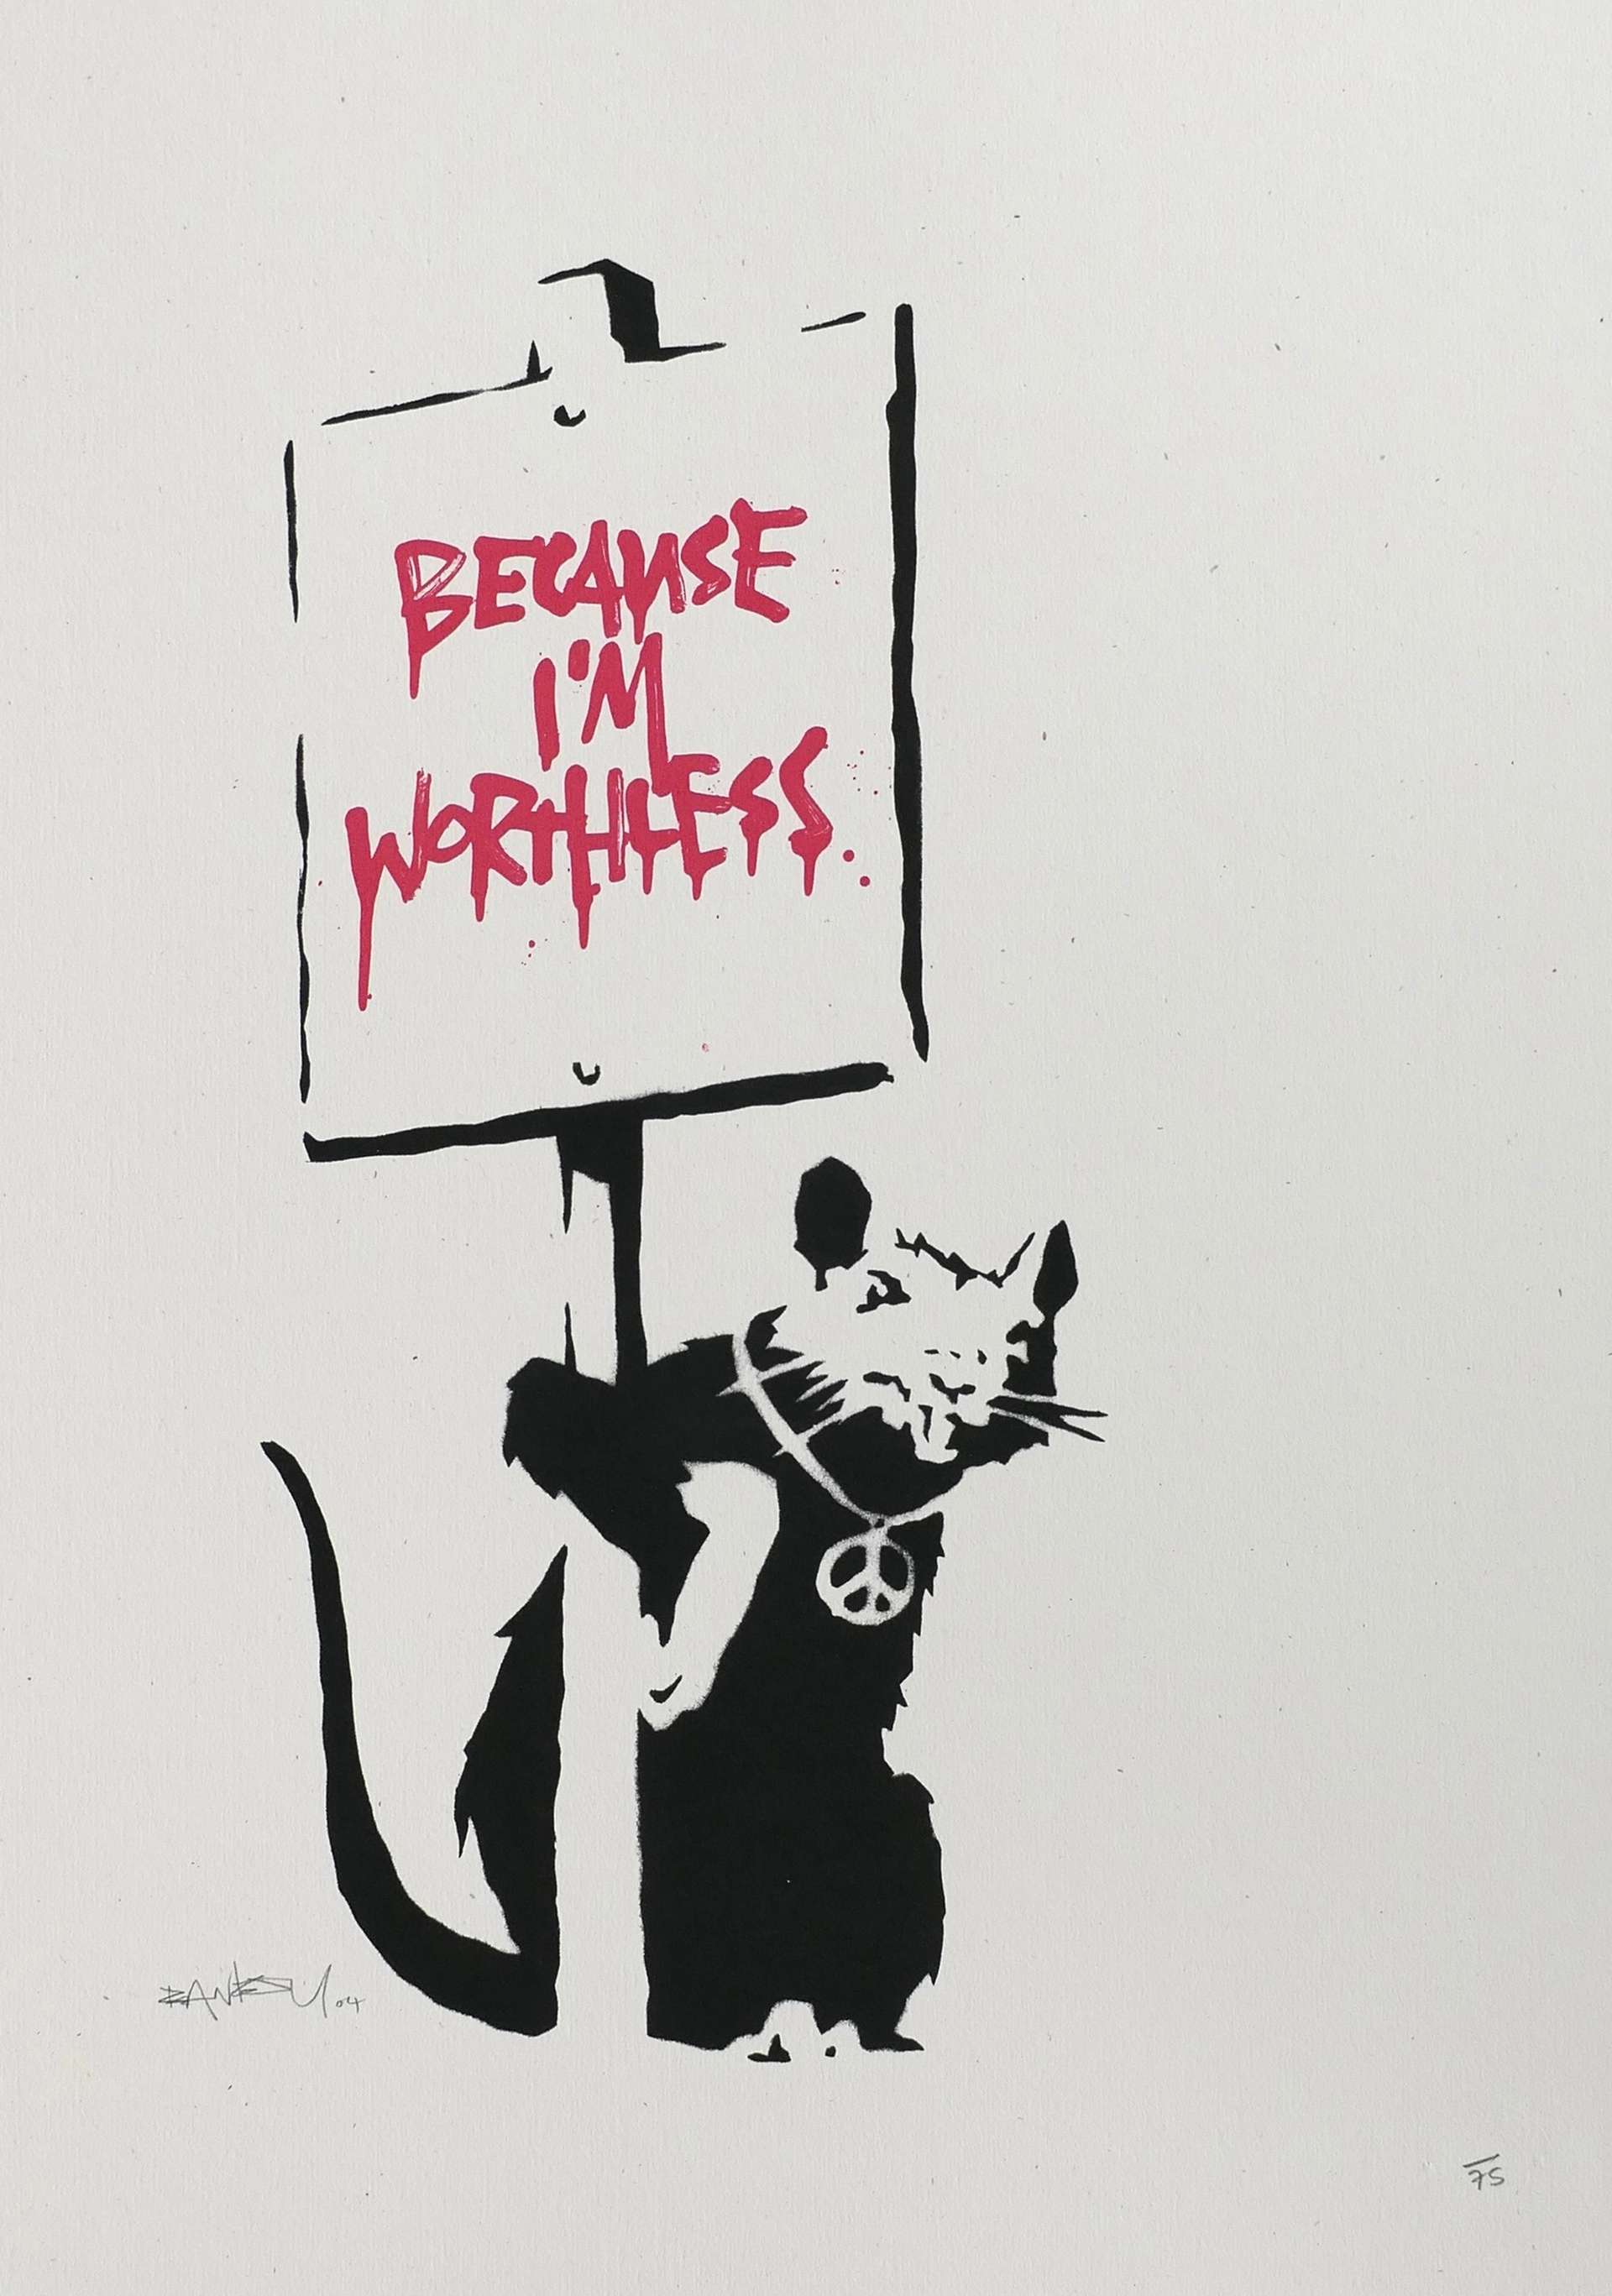 A rodent wearing a 'peace' pendant holding up a placard that reads 'Because I'm Worthless,' by Banksy.